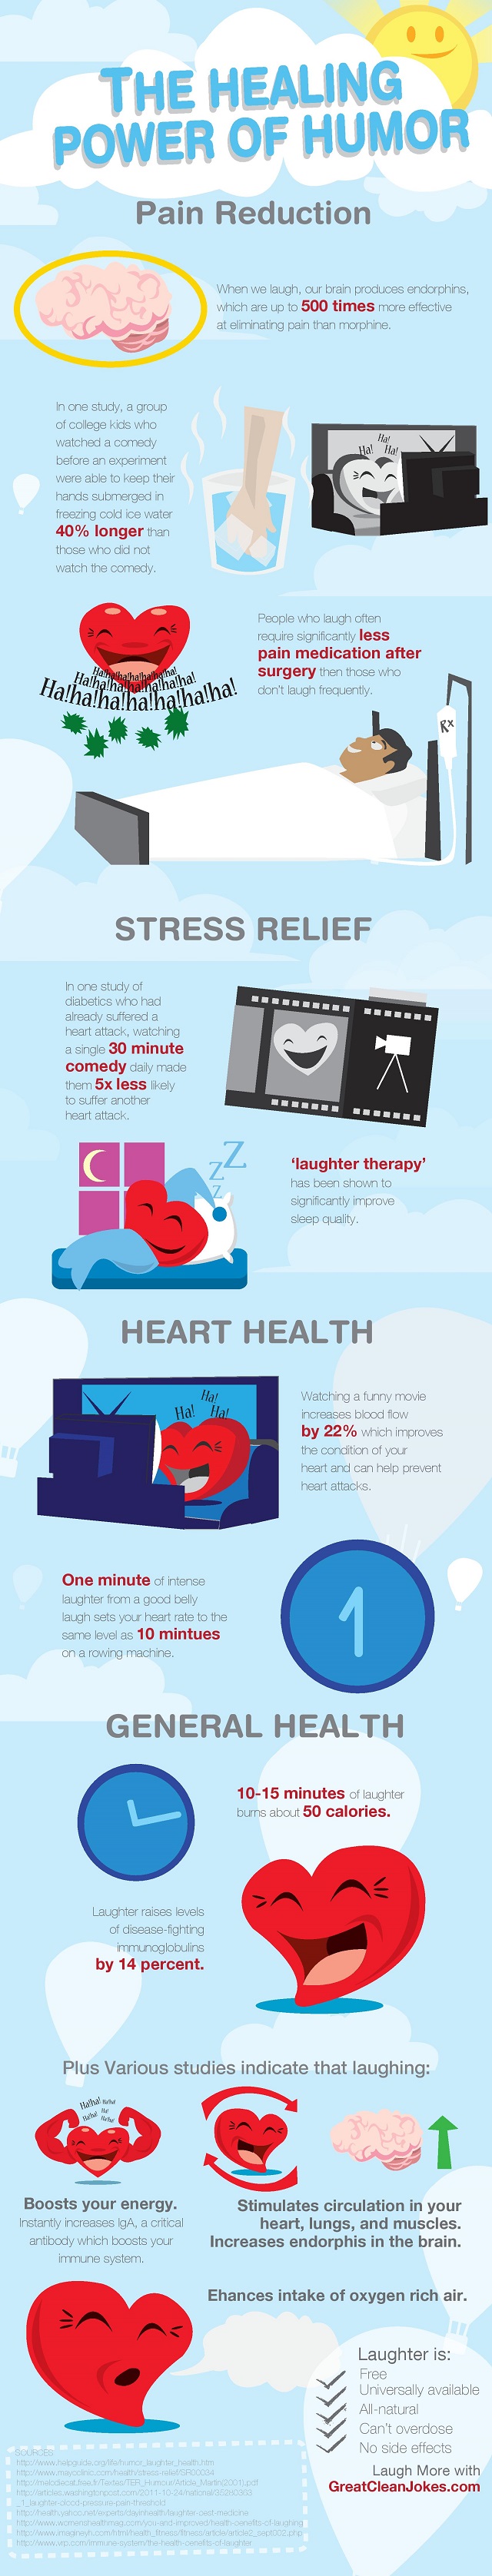 Laughter infographic